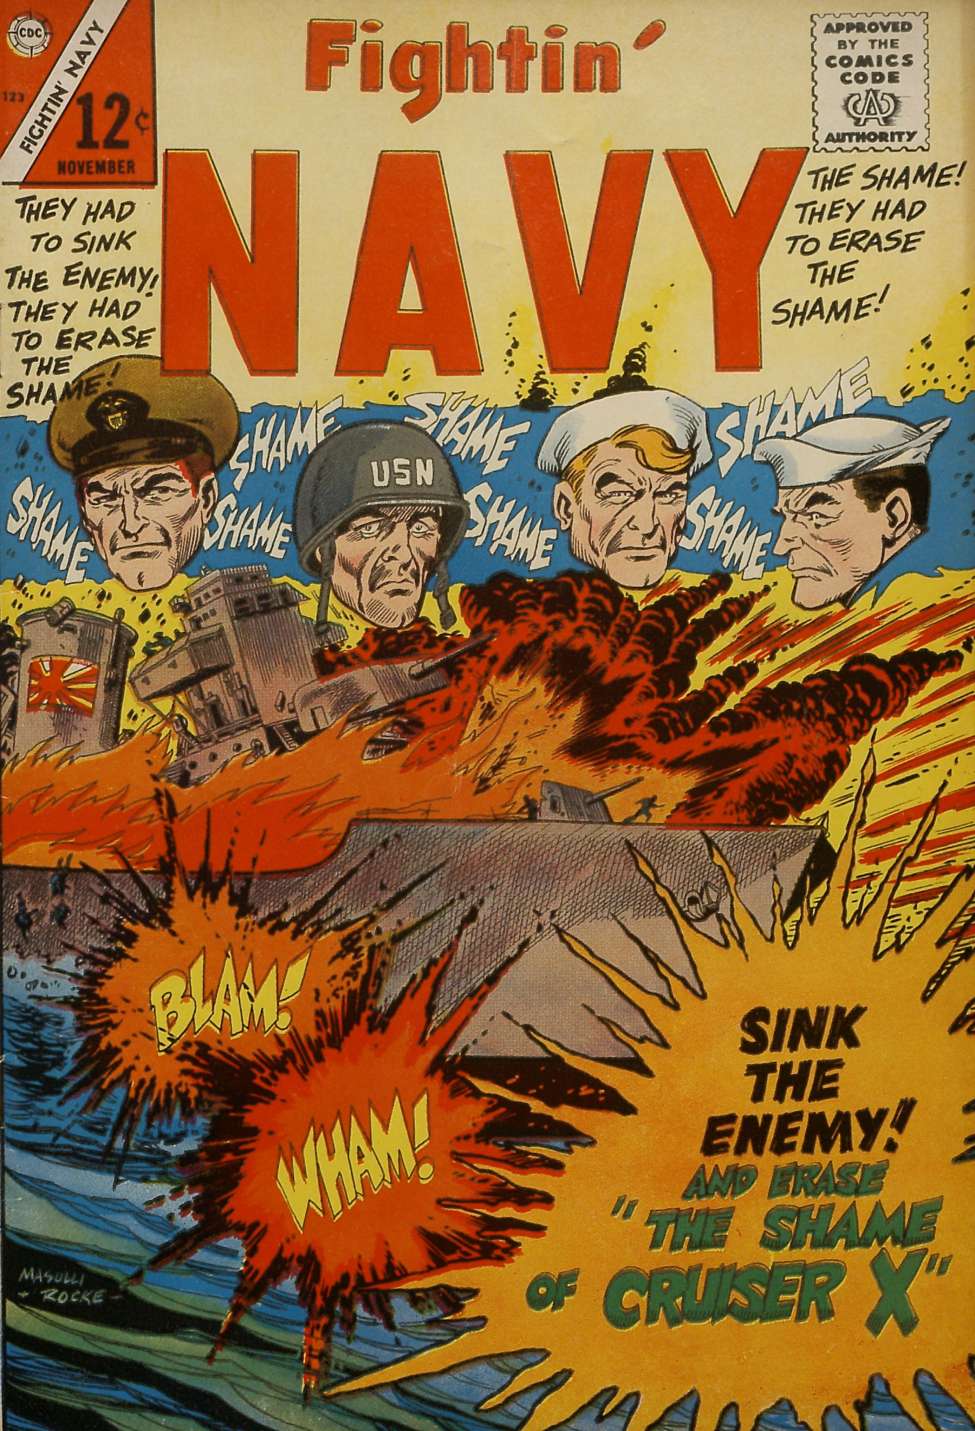 Comic Book Cover For Fightin' Navy 123 (alt) - Version 2